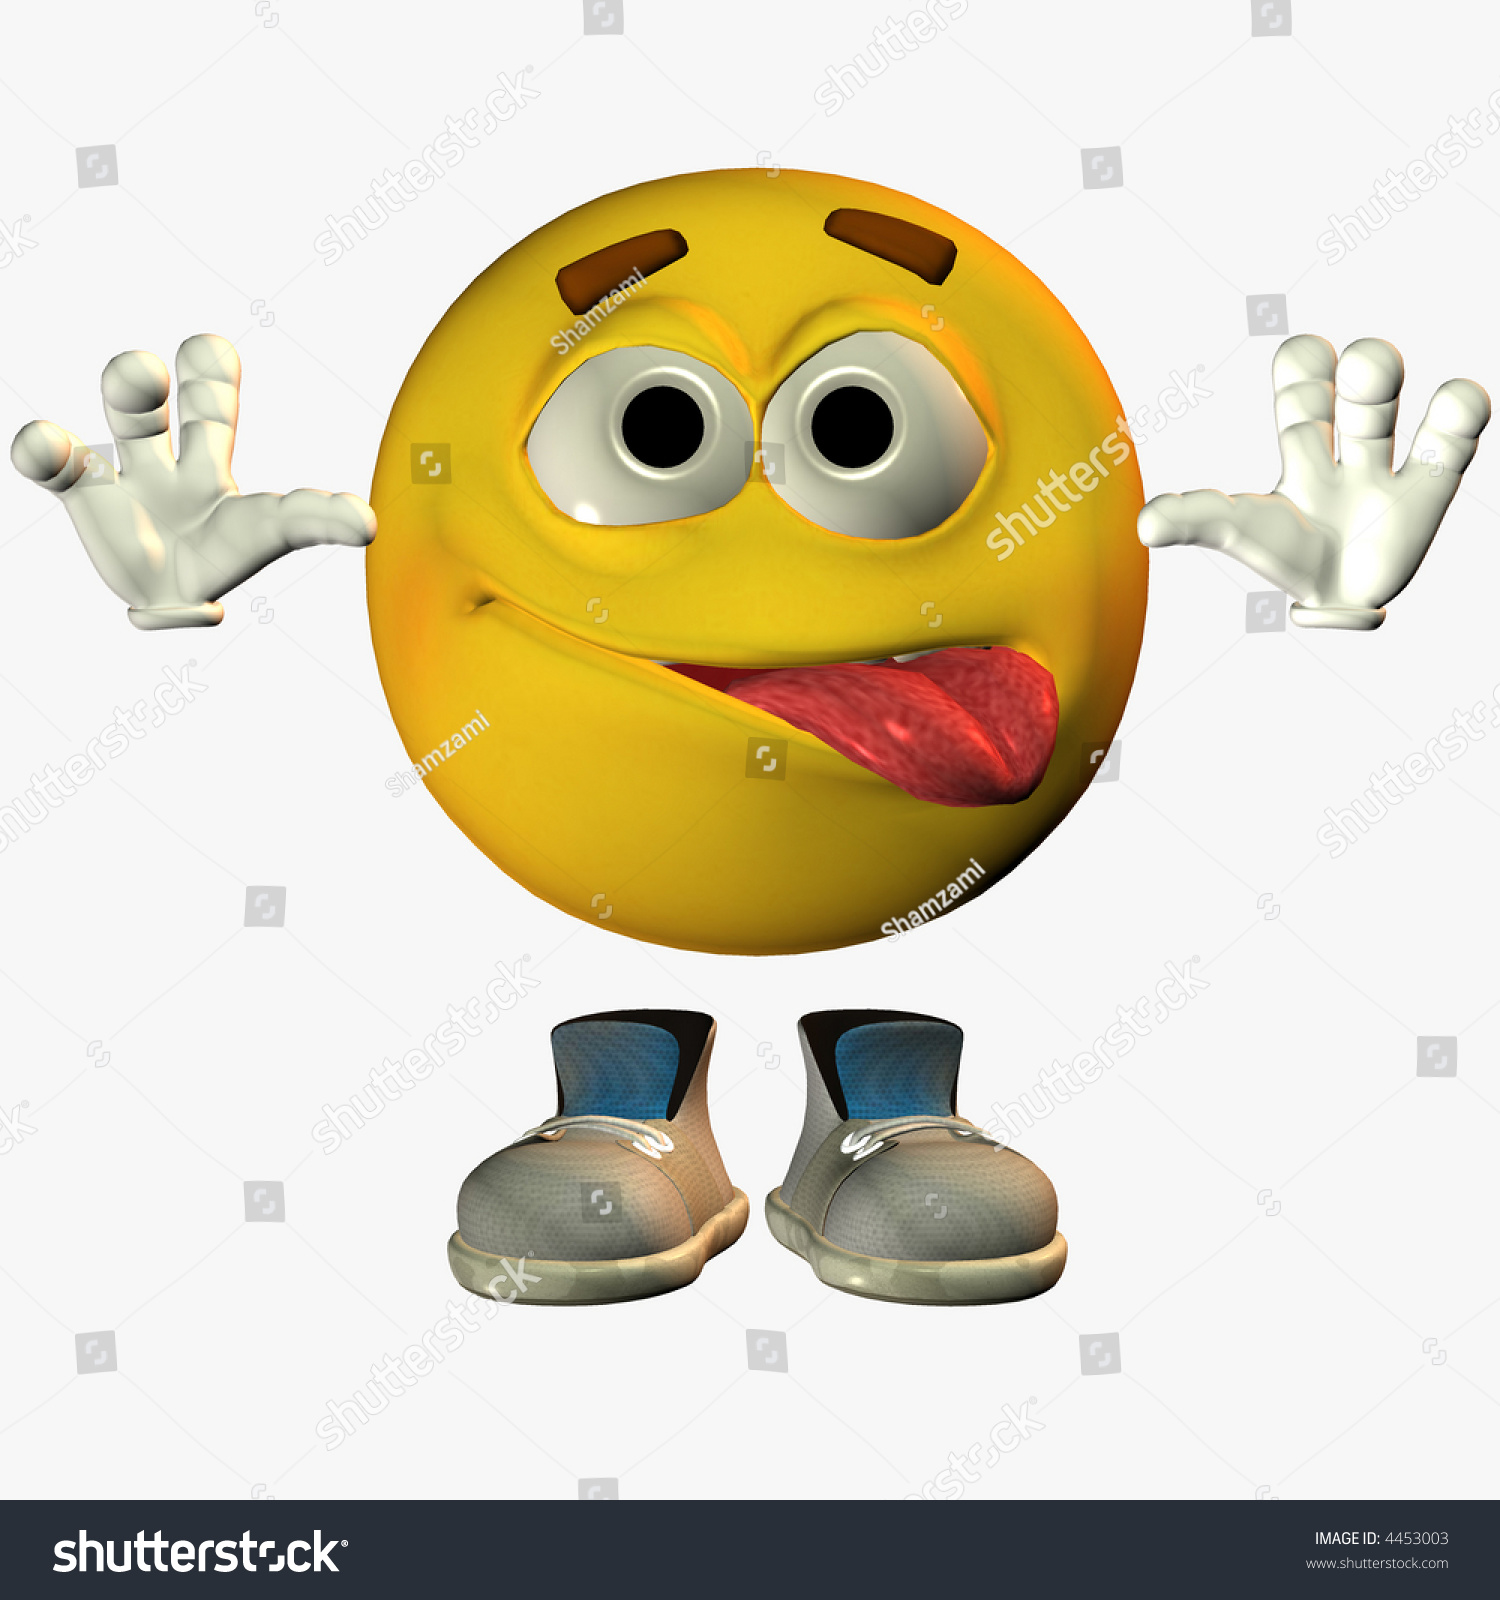 Silly Emoticon Stock Photo 4453003 : Shutterstock